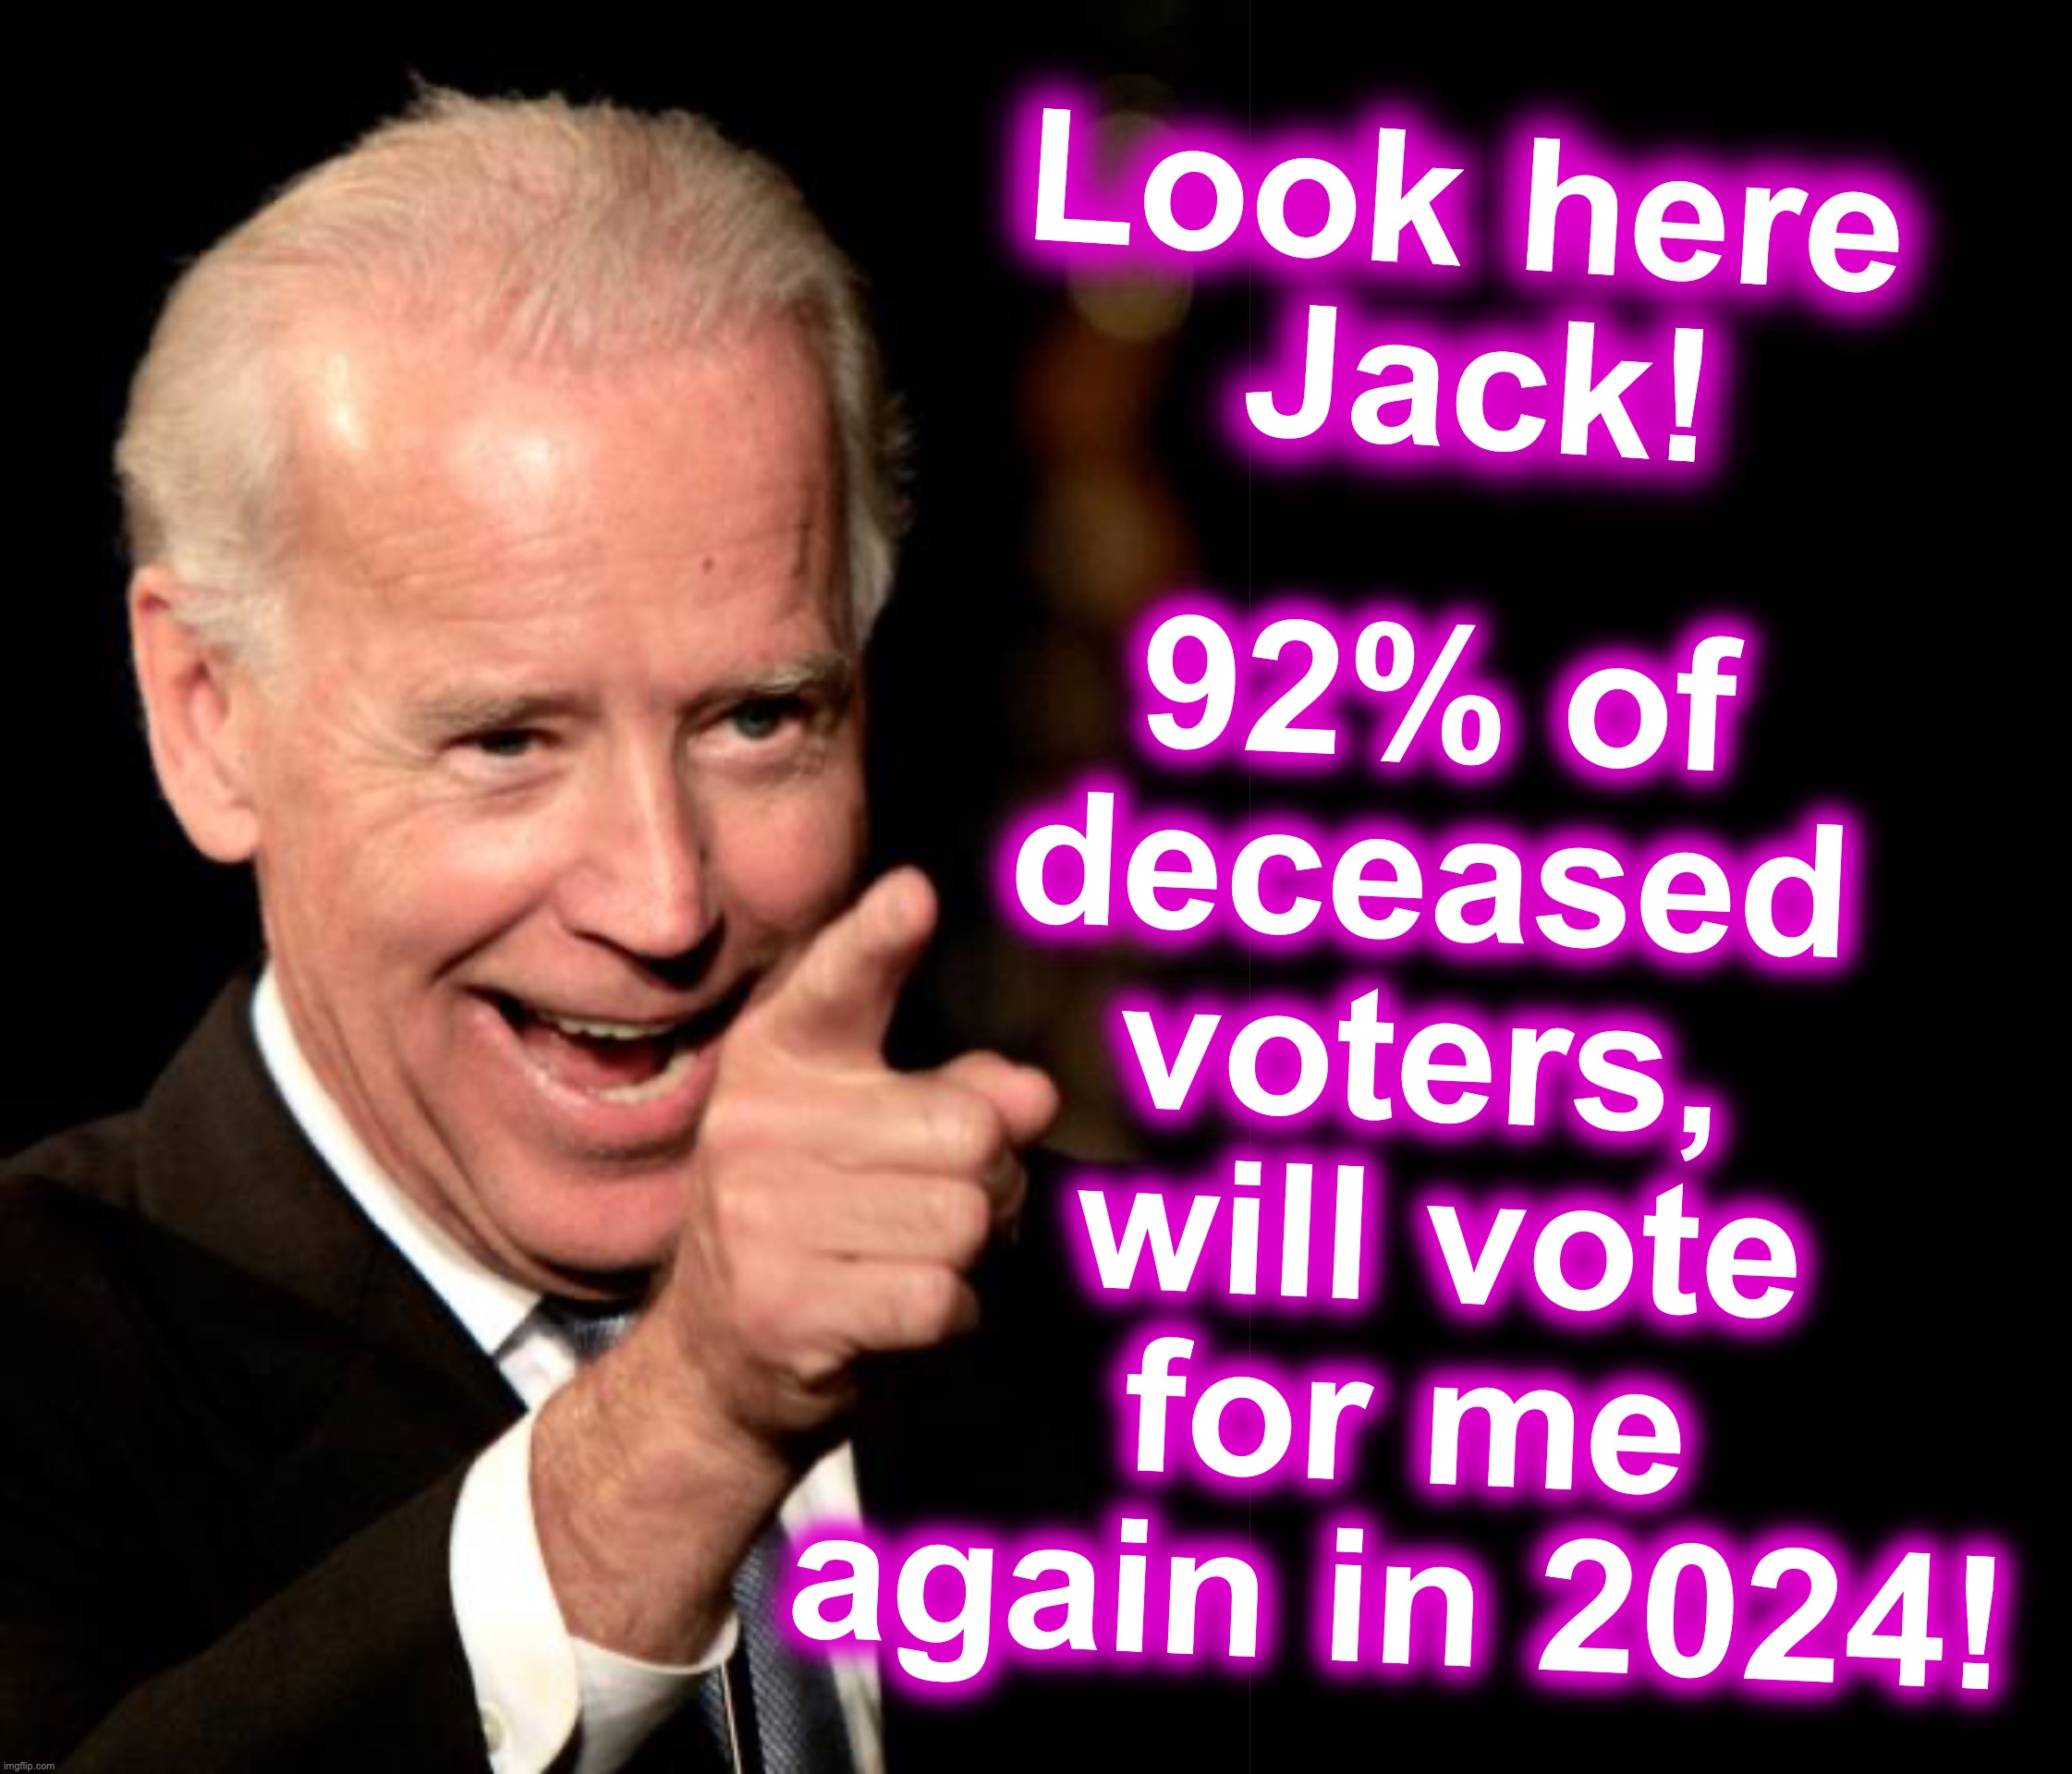 It's nice to have such a reliable base, but he's gotta work on those 8% hold-outs.  [warning: meme contains satire] | 92% of deceased voters,
 will vote for me again in 2024! Look here
 Jack! | image tagged in smilin biden,memes | made w/ Imgflip meme maker